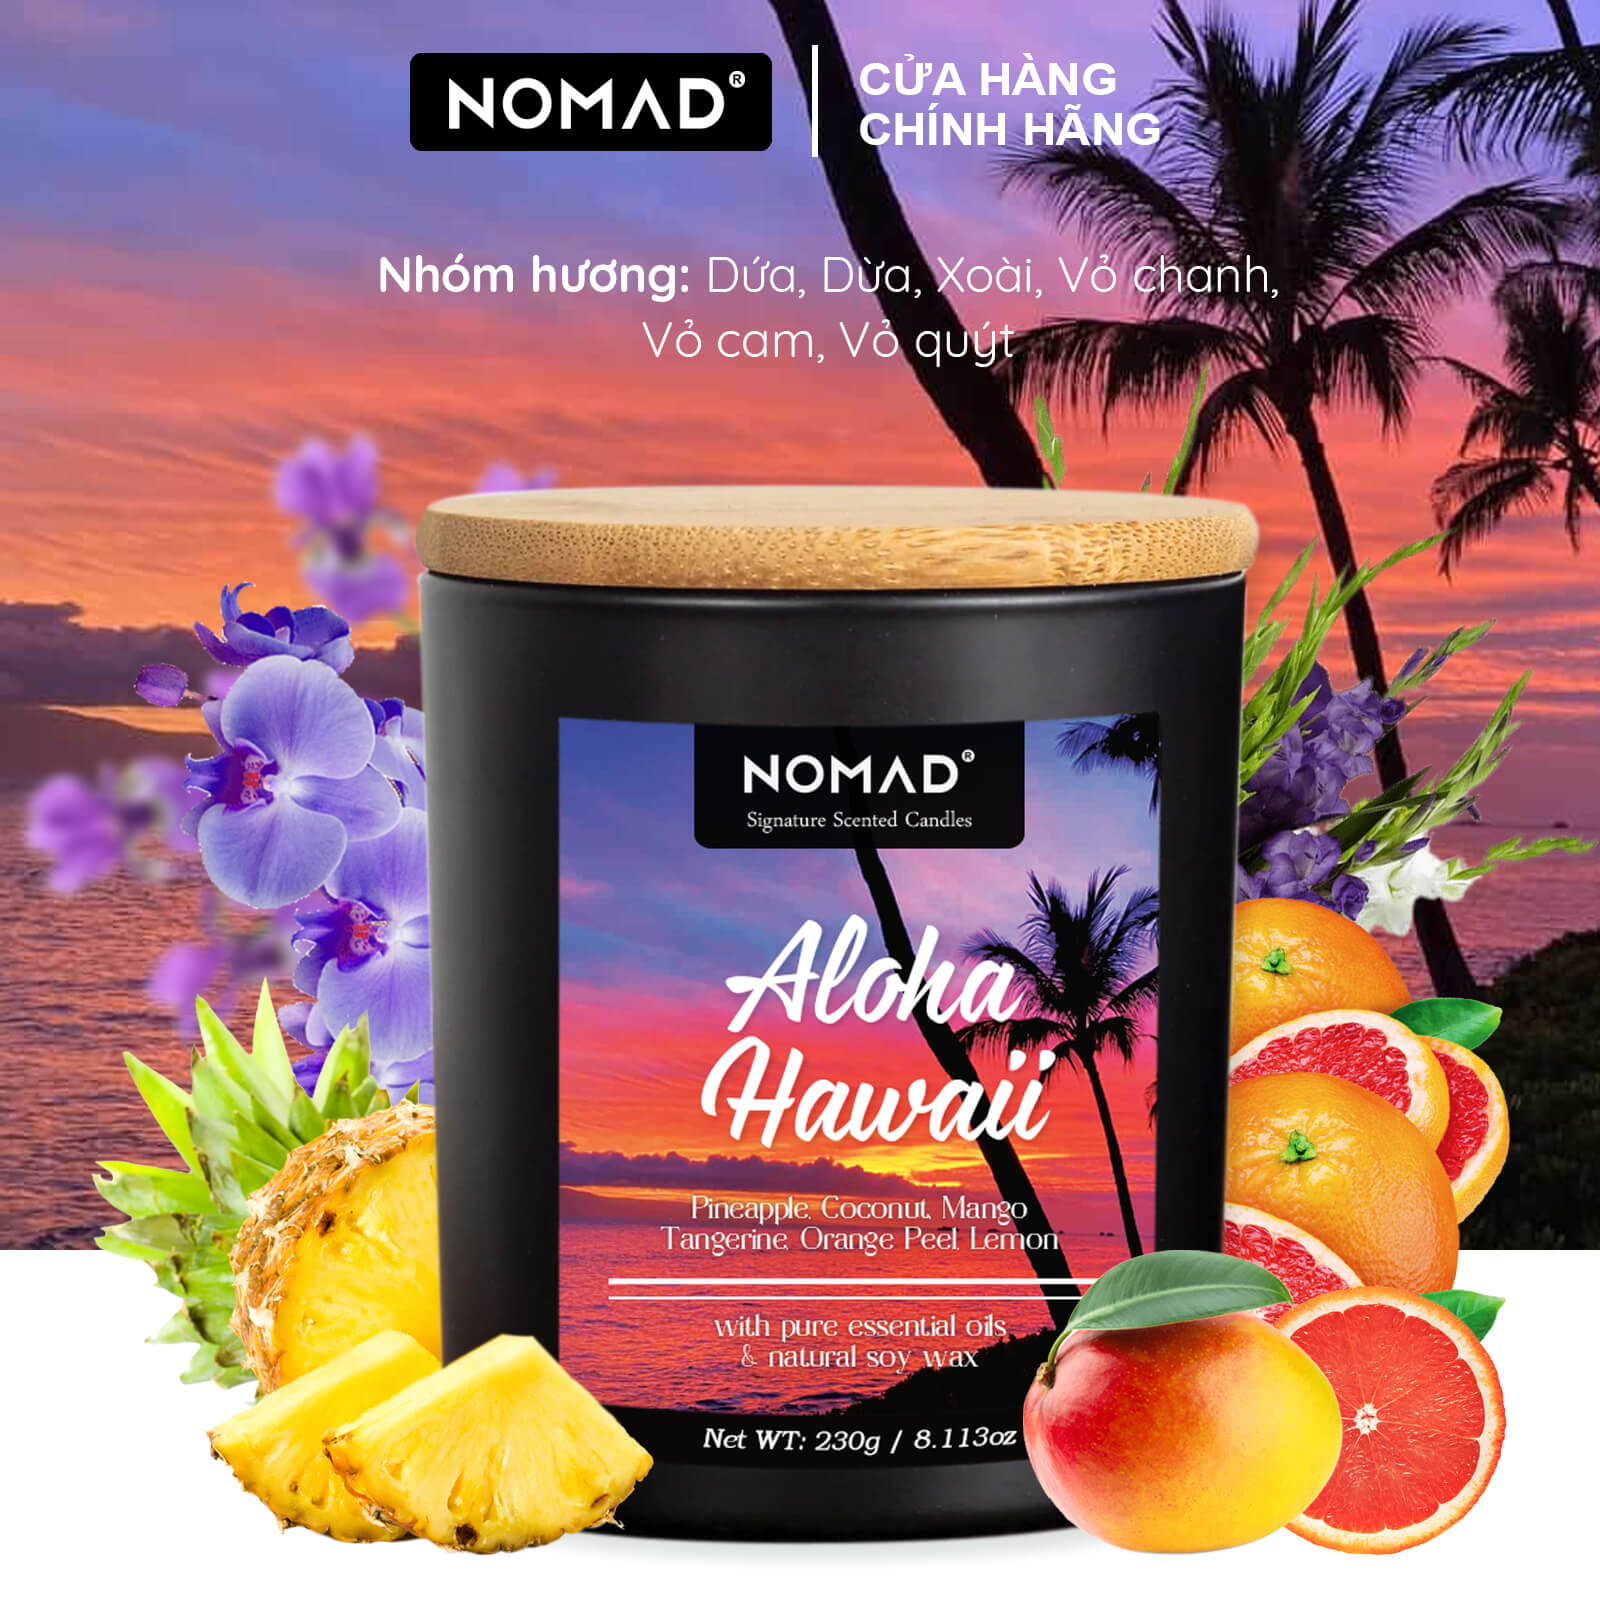 Nến Thơm Cao Cấp Nomad Signature Scented Candle 230g